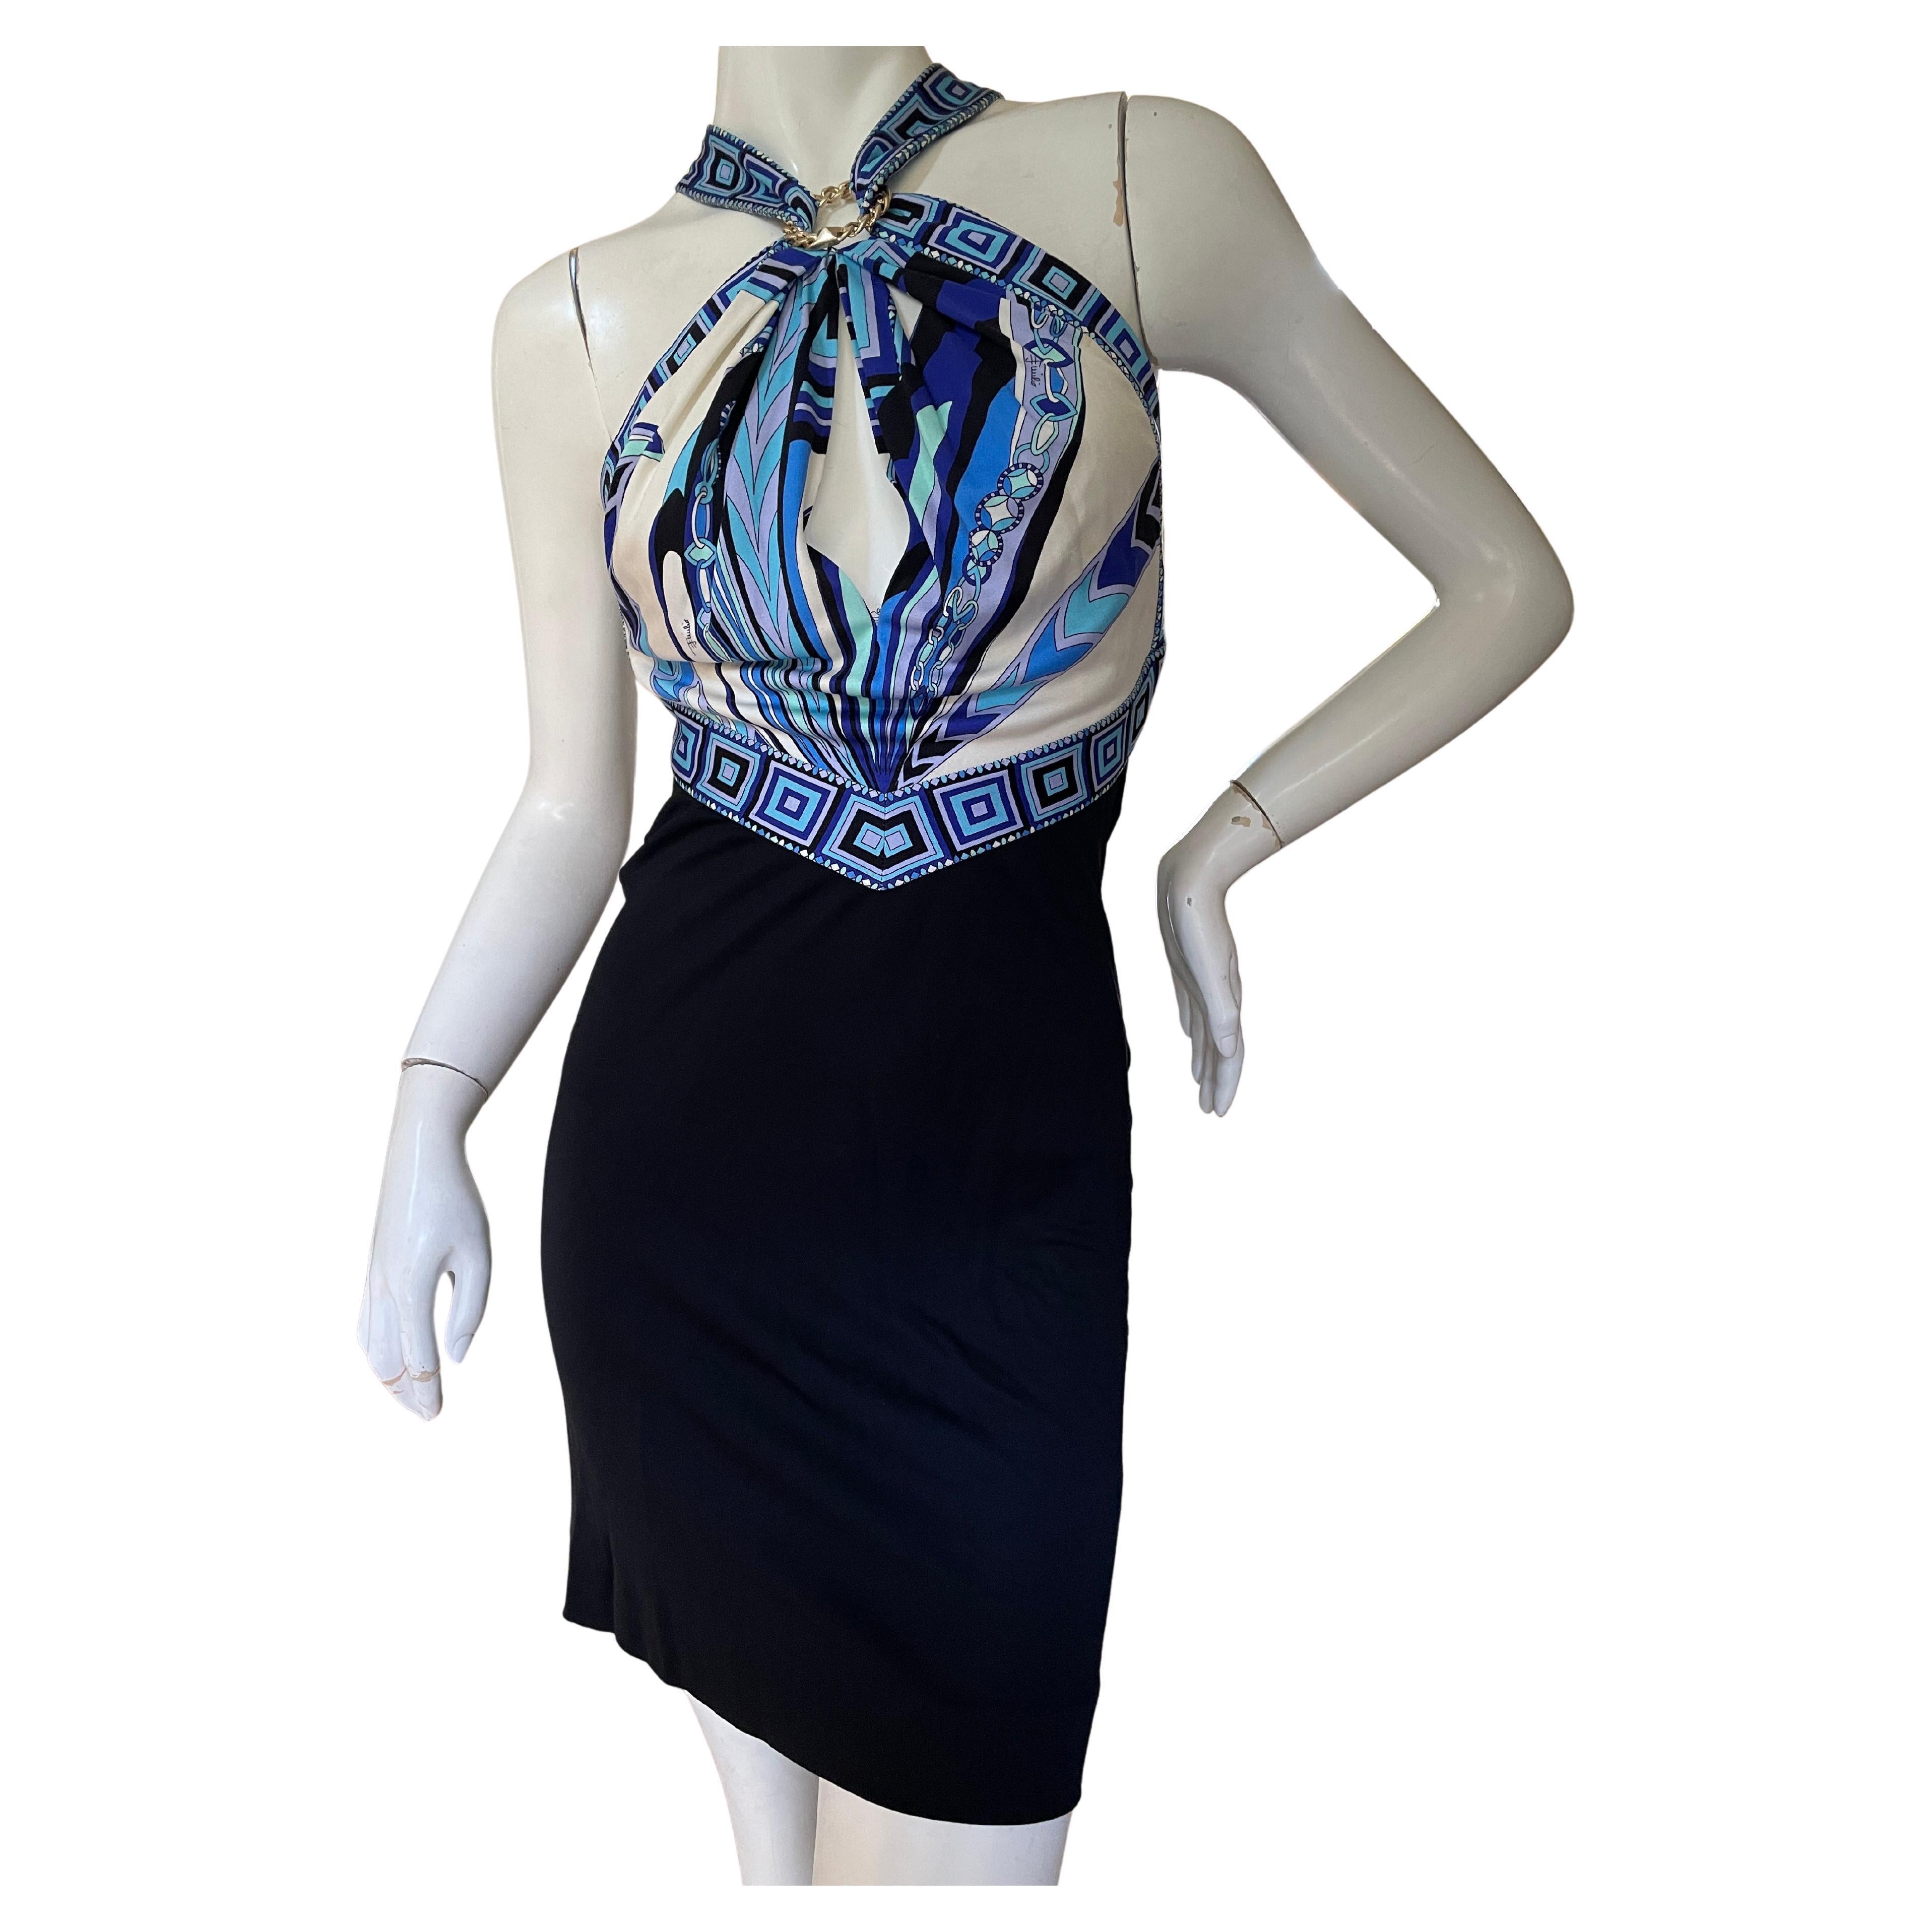 Emilio Pucci Halter Style Vintage Racer Back Mini Dress with Peek a Boo Keyhole For Sale